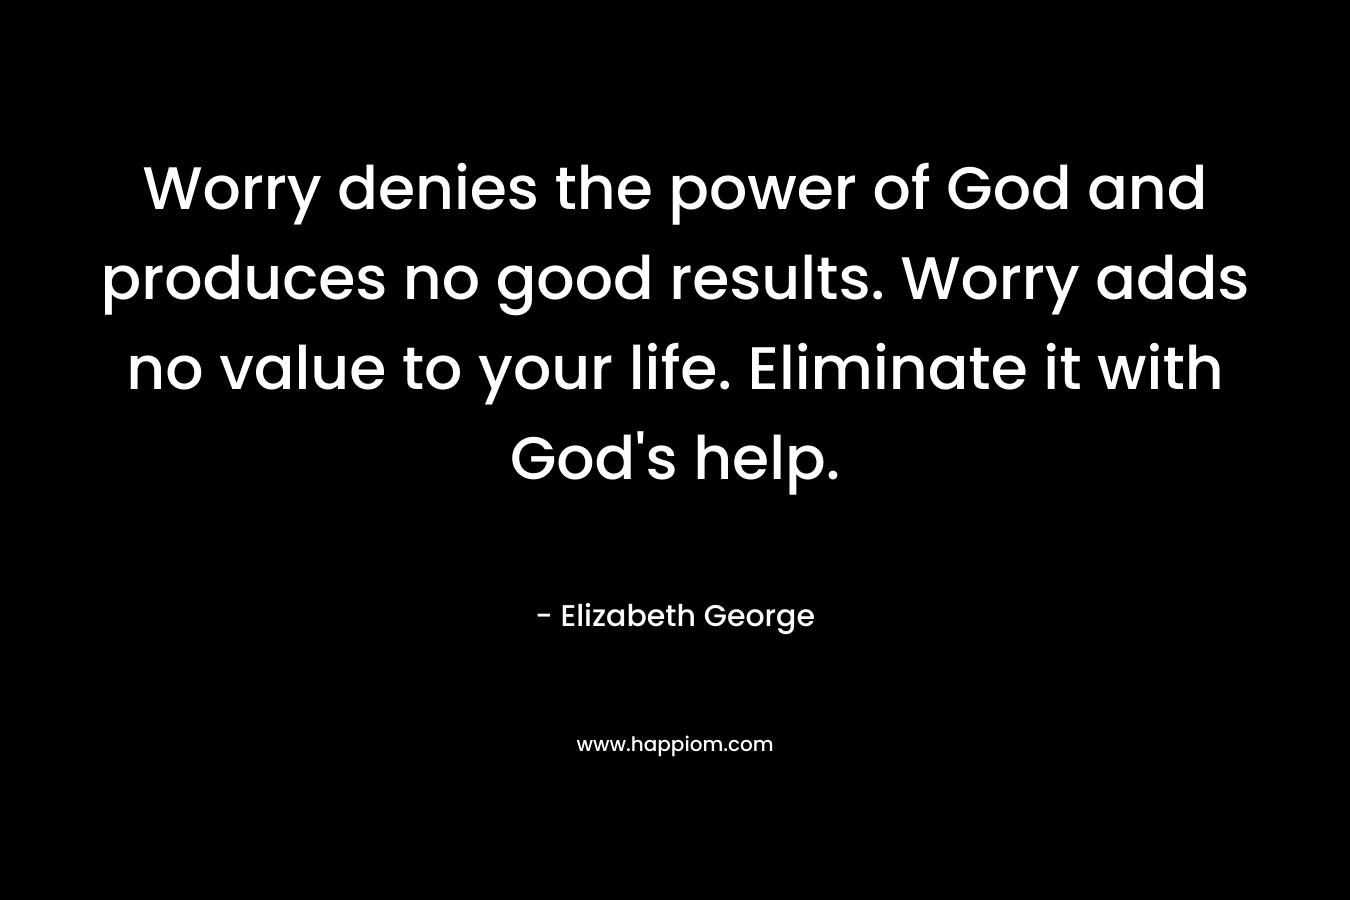 Worry denies the power of God and produces no good results. Worry adds no value to your life. Eliminate it with God's help.